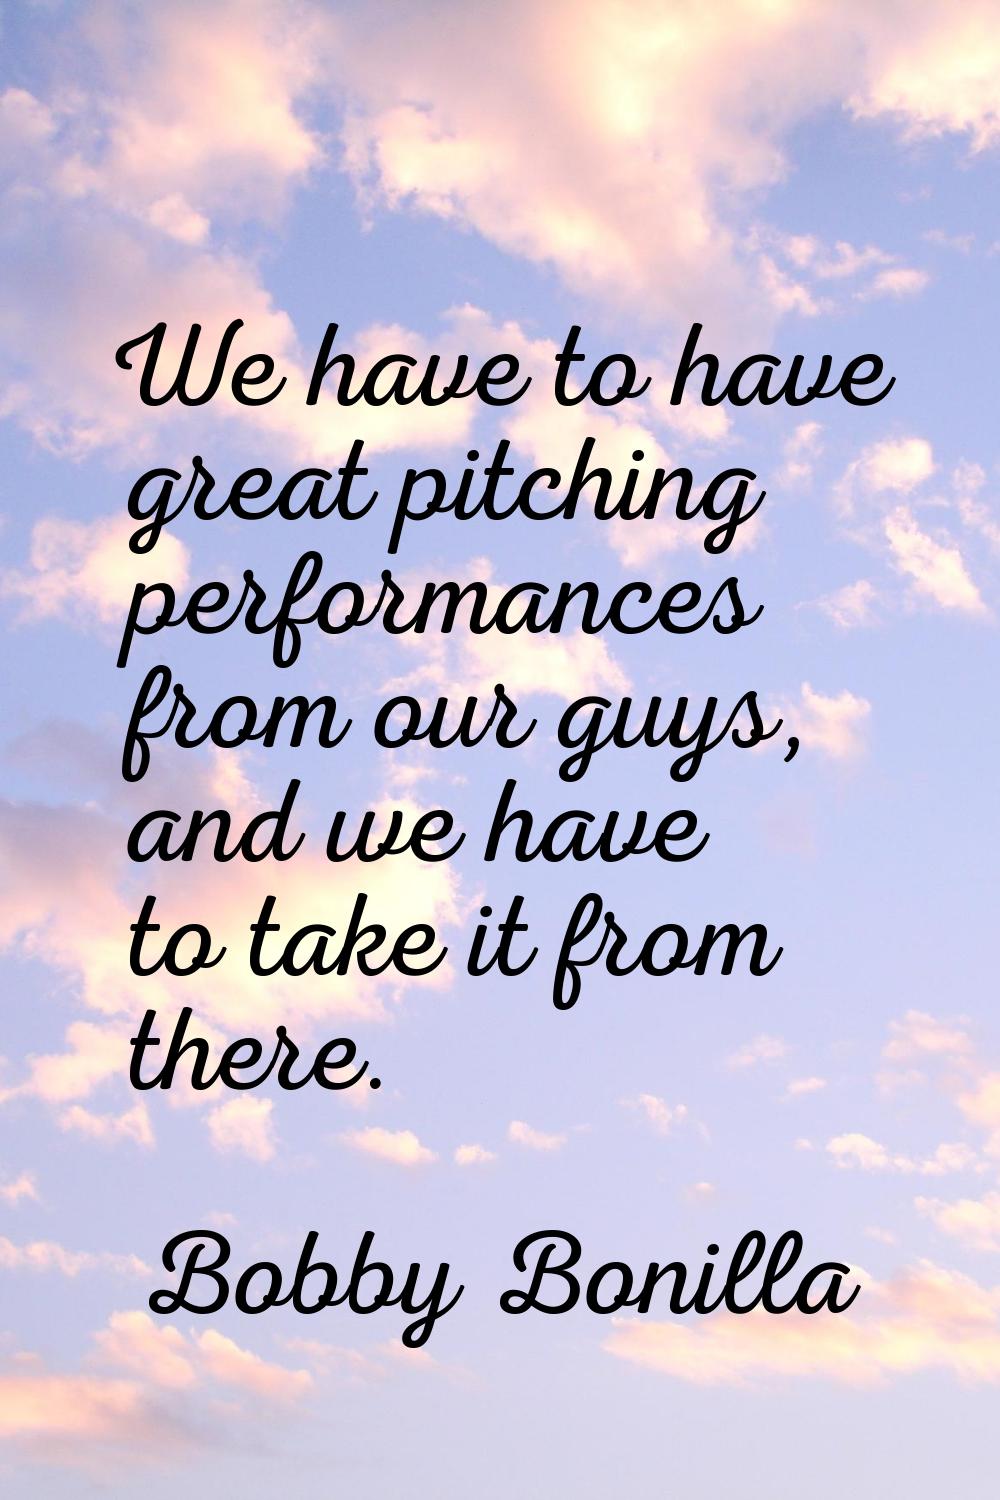 We have to have great pitching performances from our guys, and we have to take it from there.